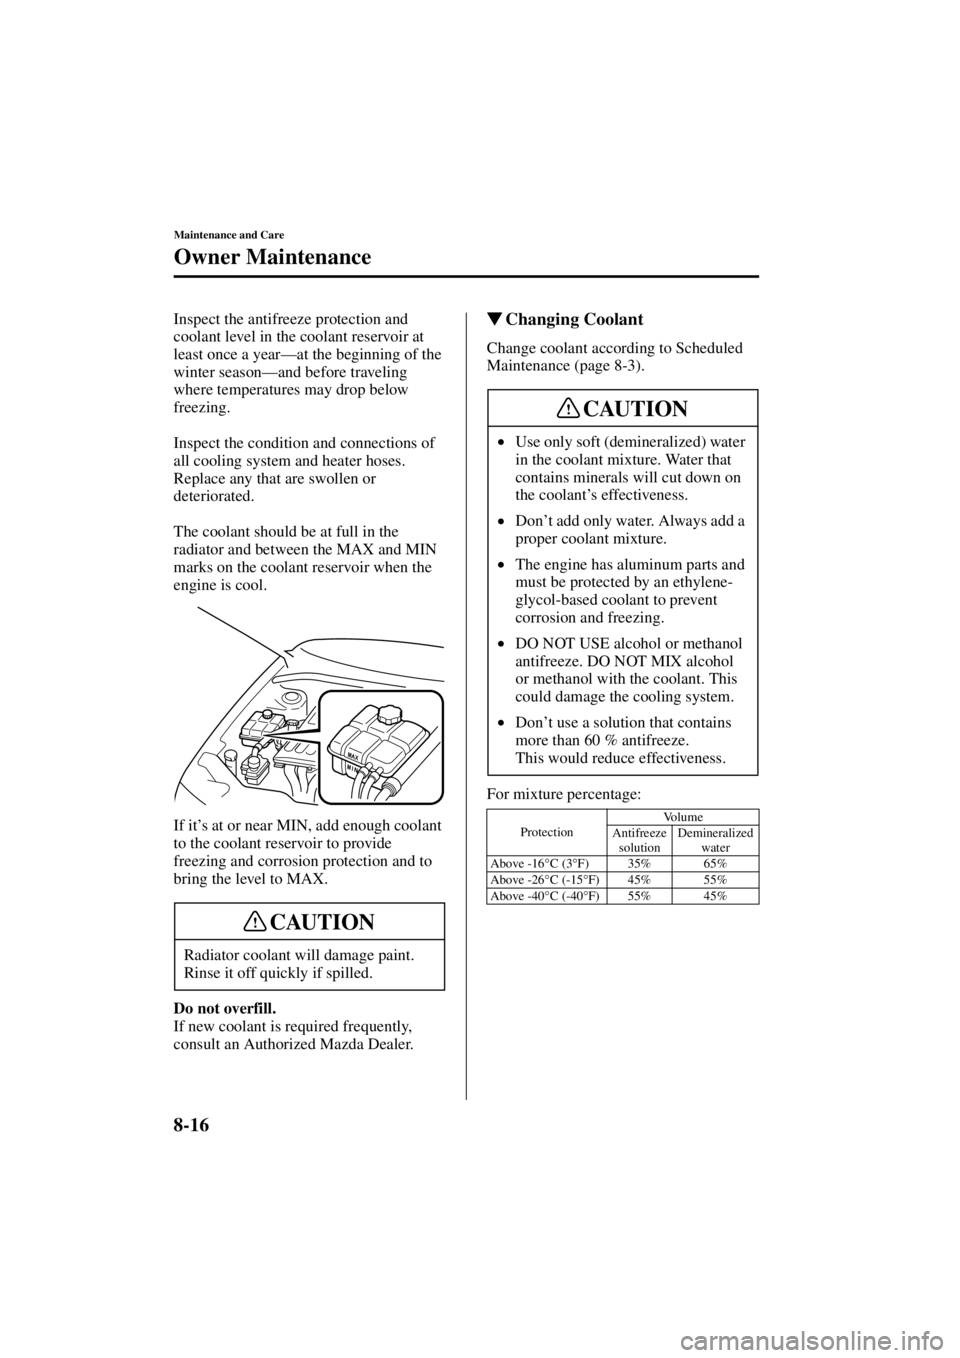 MAZDA MODEL 3 5-DOOR 2004  Owners Manual 8-16
Maintenance and Care
Owner Maintenance
Form No. 8S18-EA-03I
Inspect the antifreeze protection and 
coolant level in the coolant reservoir at 
least once a year—at the beginning of the 
winter s